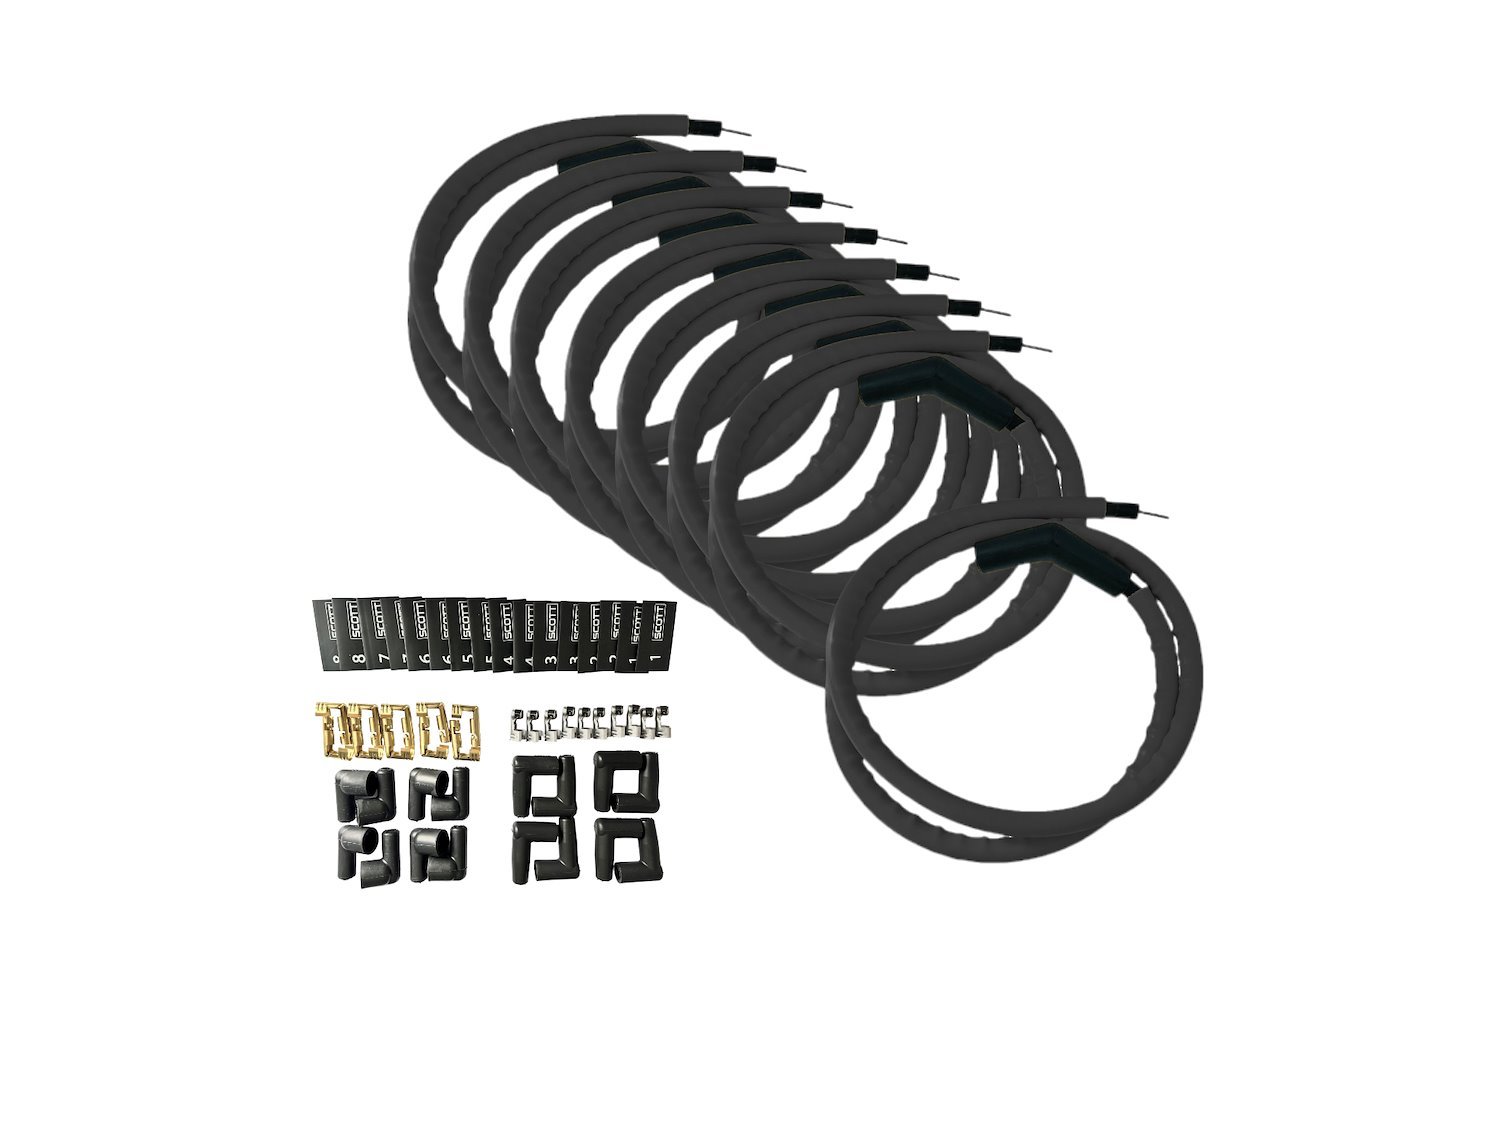 SPW-CH-K45-1 DIY High-Performance Silicone-Sleeved Spark Plug Wire Set, 45-Degree Boot [Black]